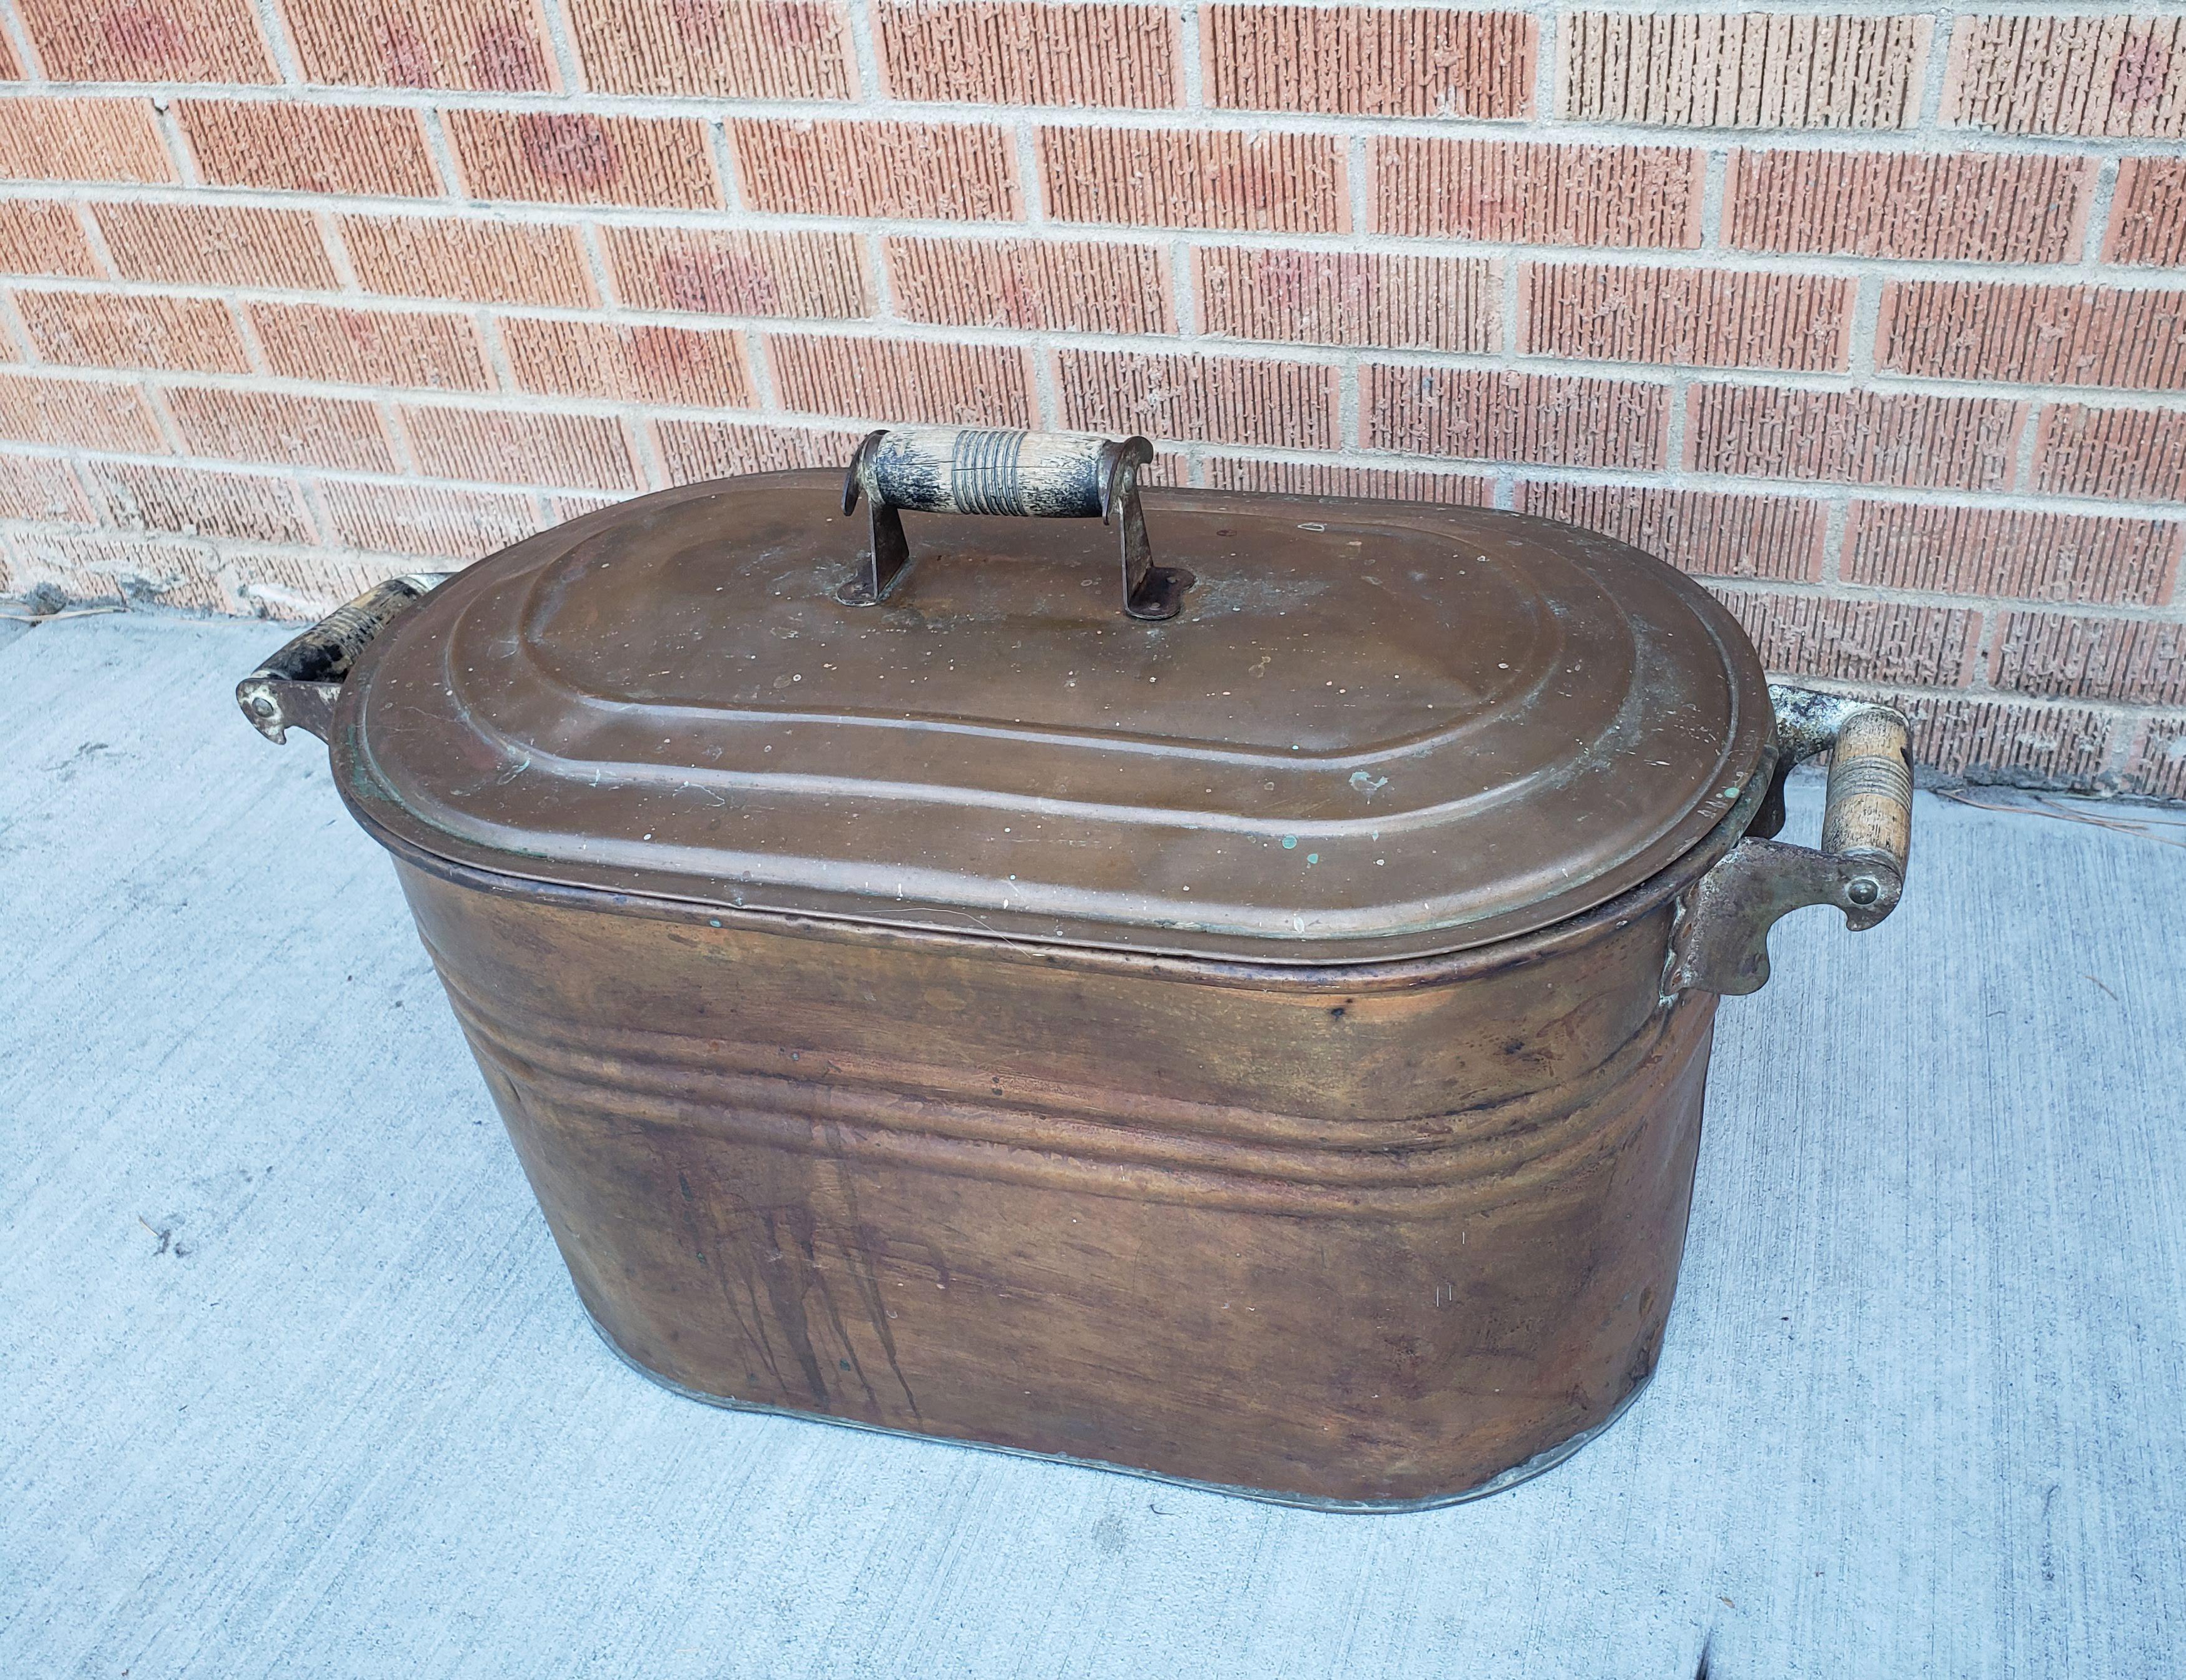 Late 19th century American copper bin with lid. The bin has two copper and wood handles on the base and one on the lid. Perfect for firewood or to store blankets.

Good vintage condition, show age and signs of use.